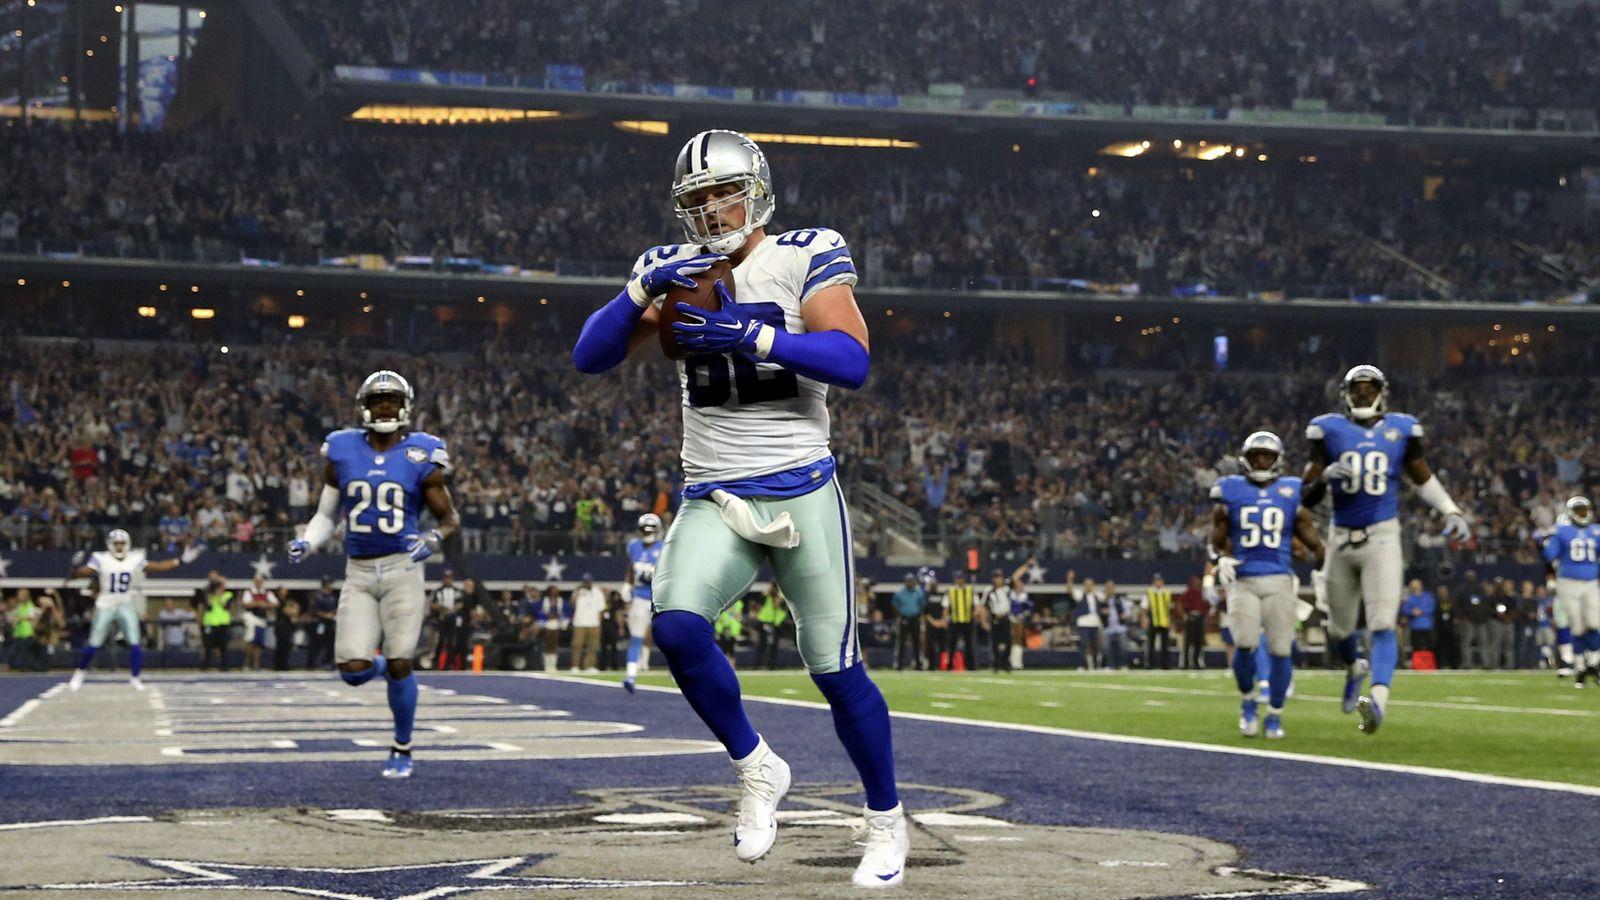 Jason Witten committed to playing at least one more season